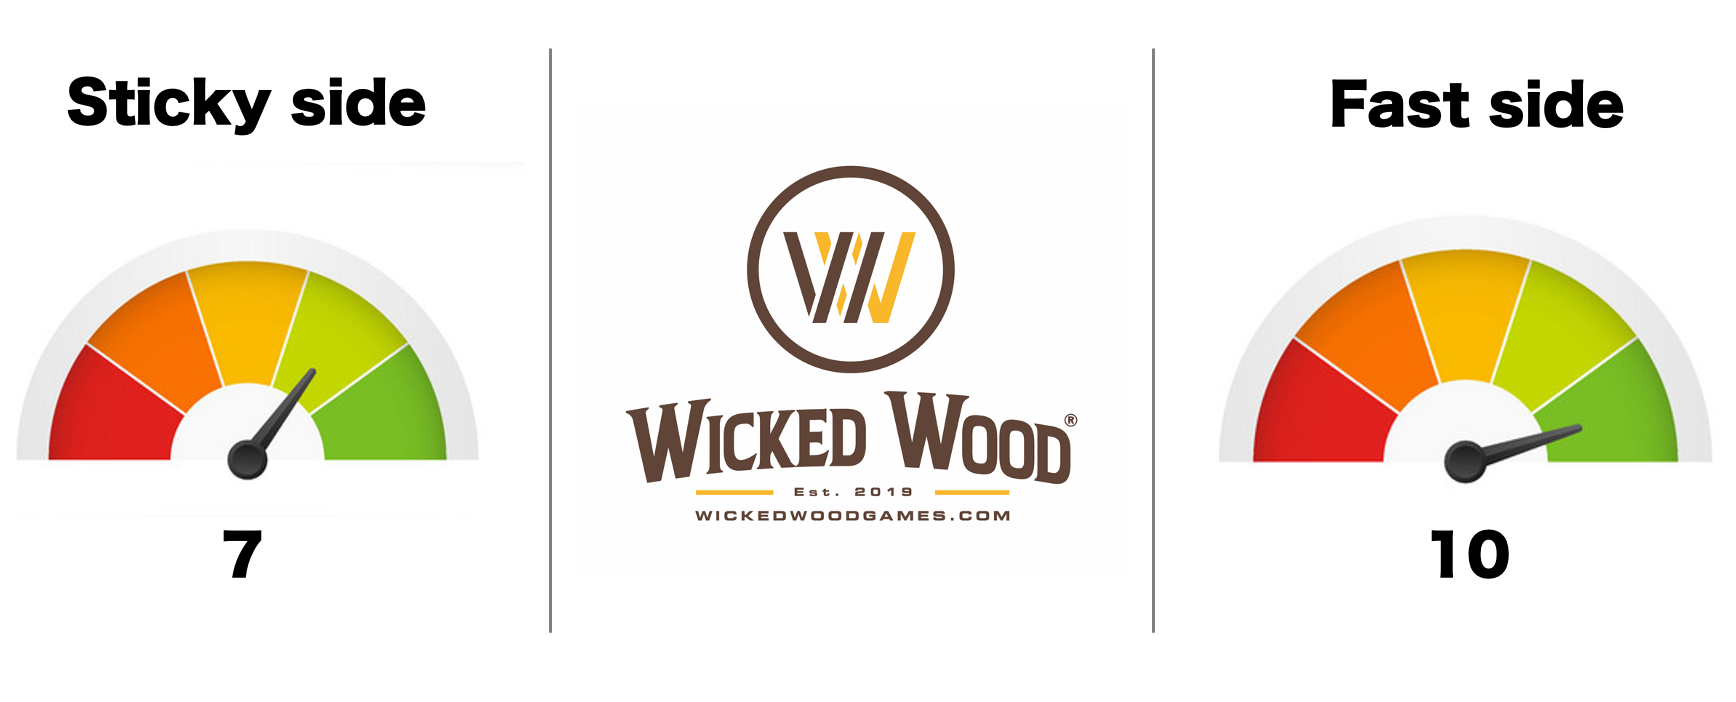 Wicked Wood Pro Bags - GameChanger 1x4 Cornhole Bags - Wicked Wood Games